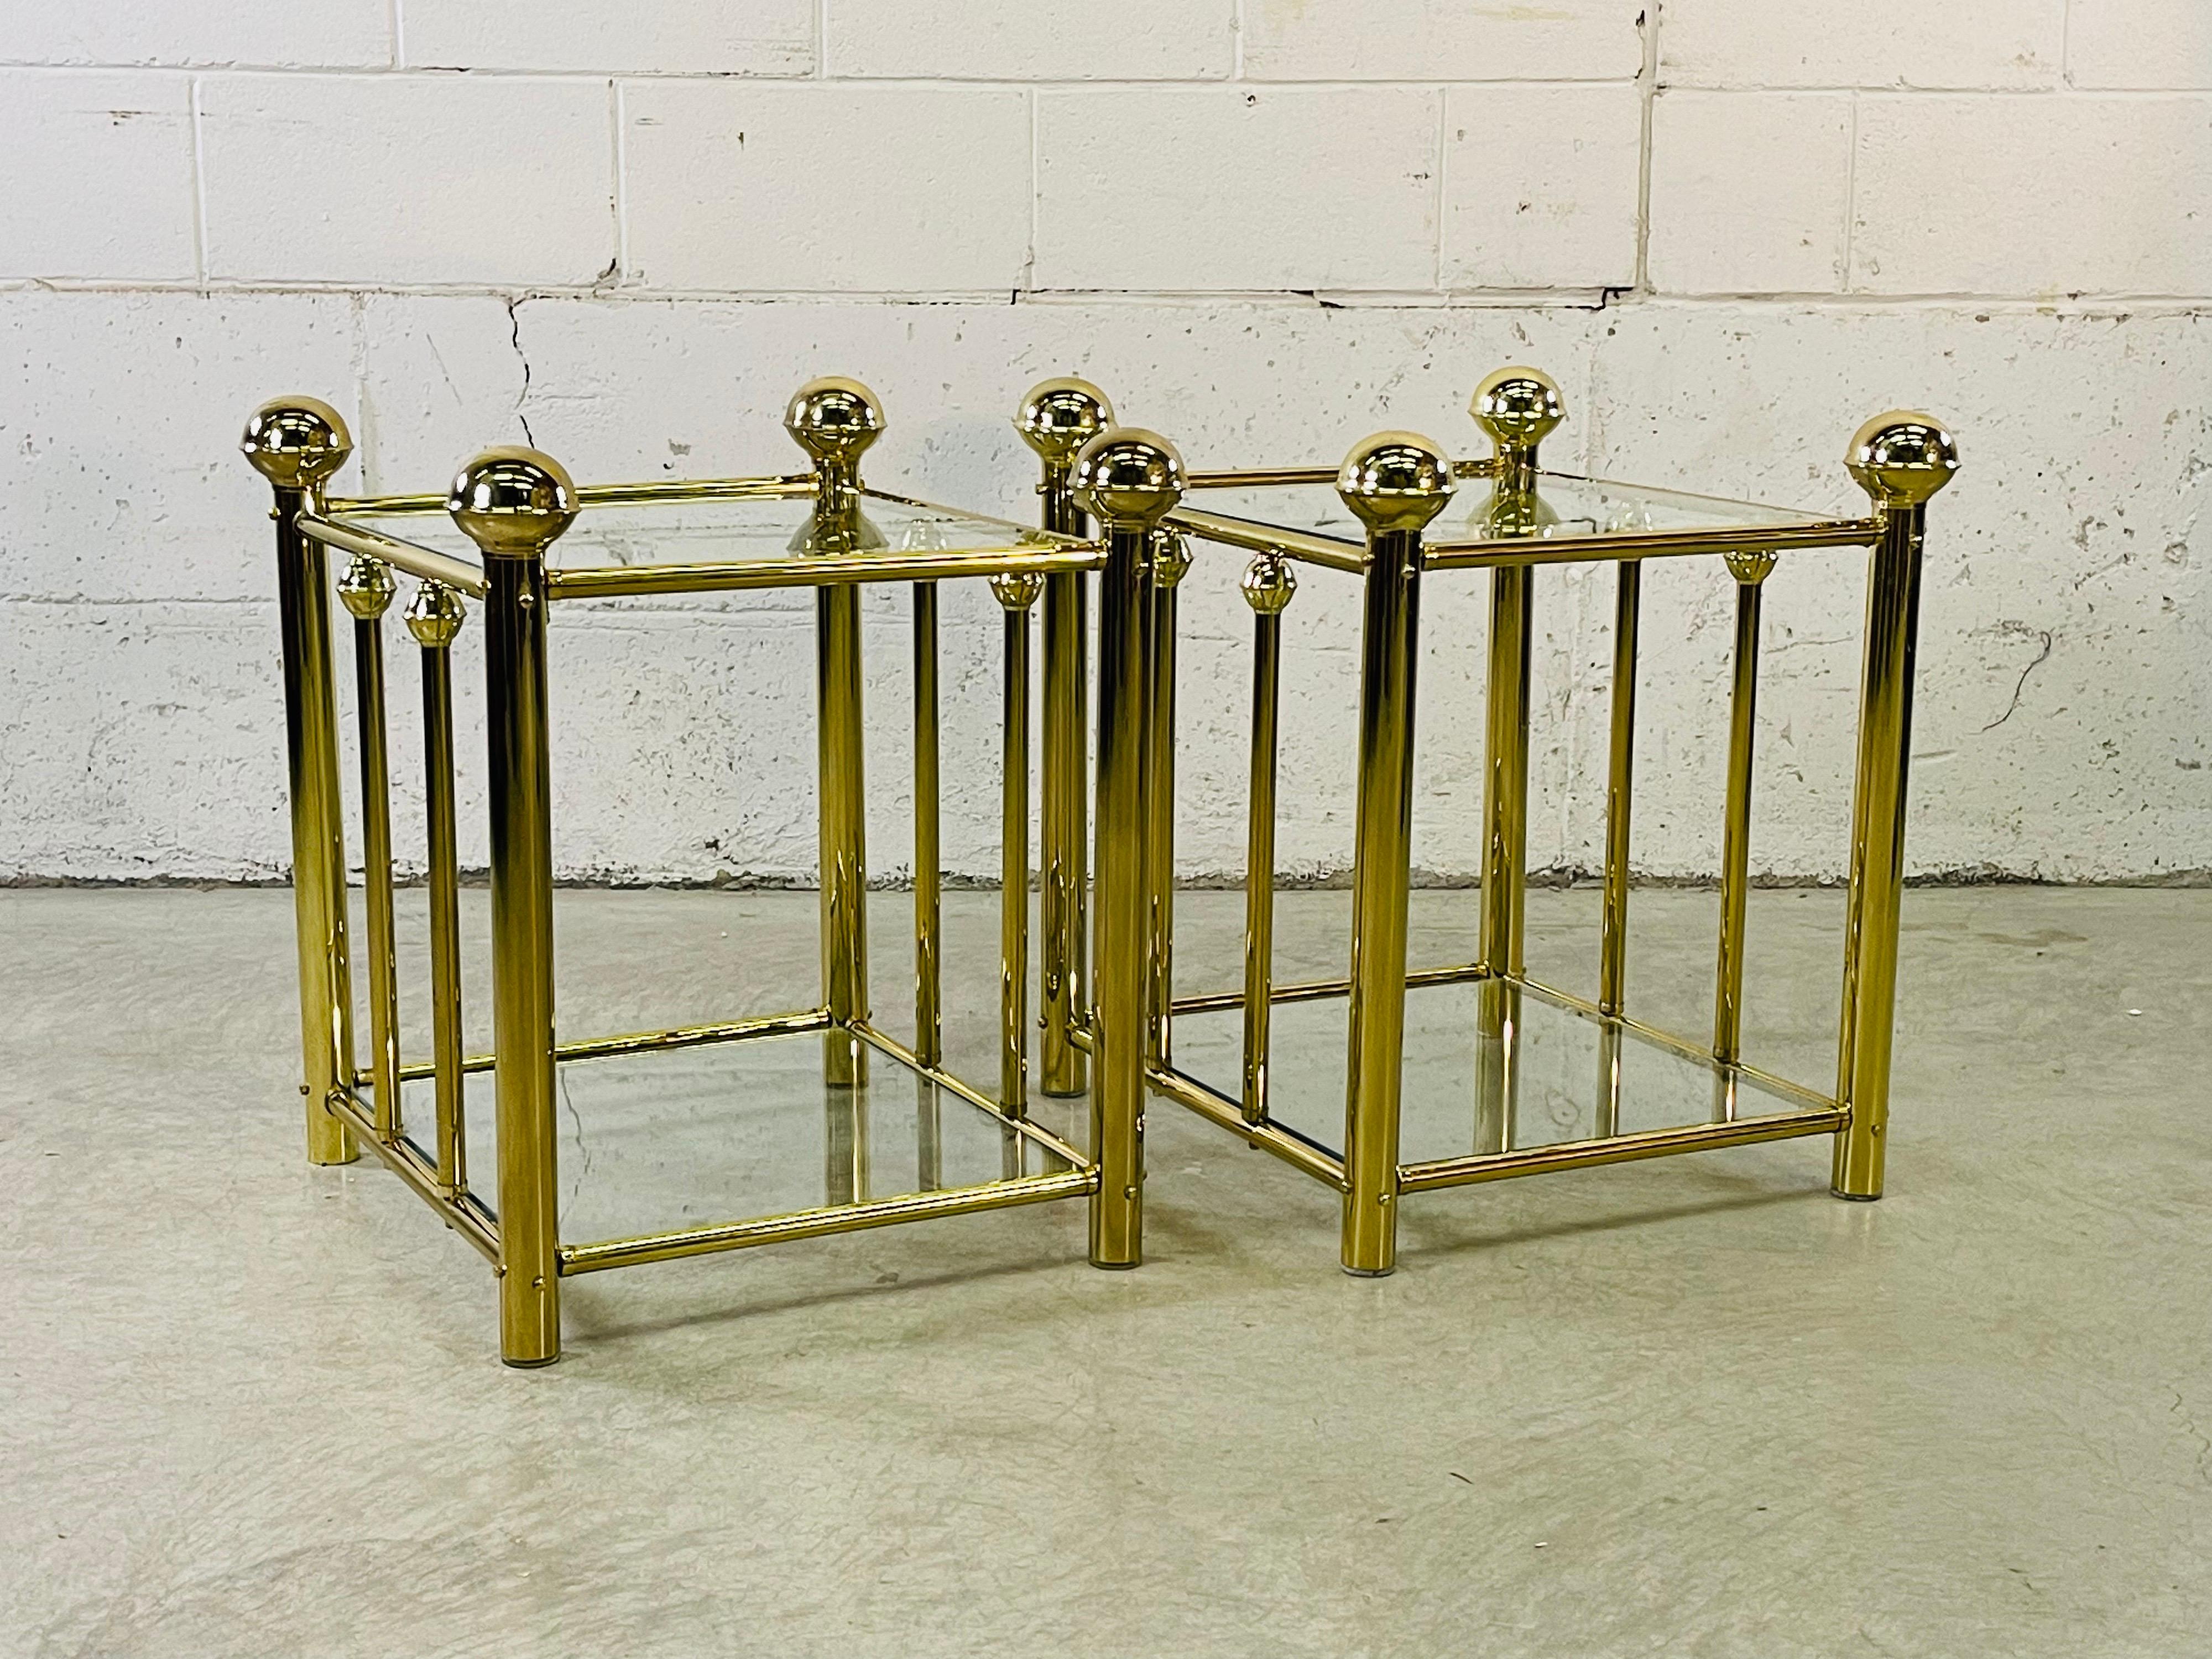 Vintage 1970s pair of brass and glass rectangular side tables. The tables have an additional shelf for storage. There is 17” in height between the shelves. No marks.